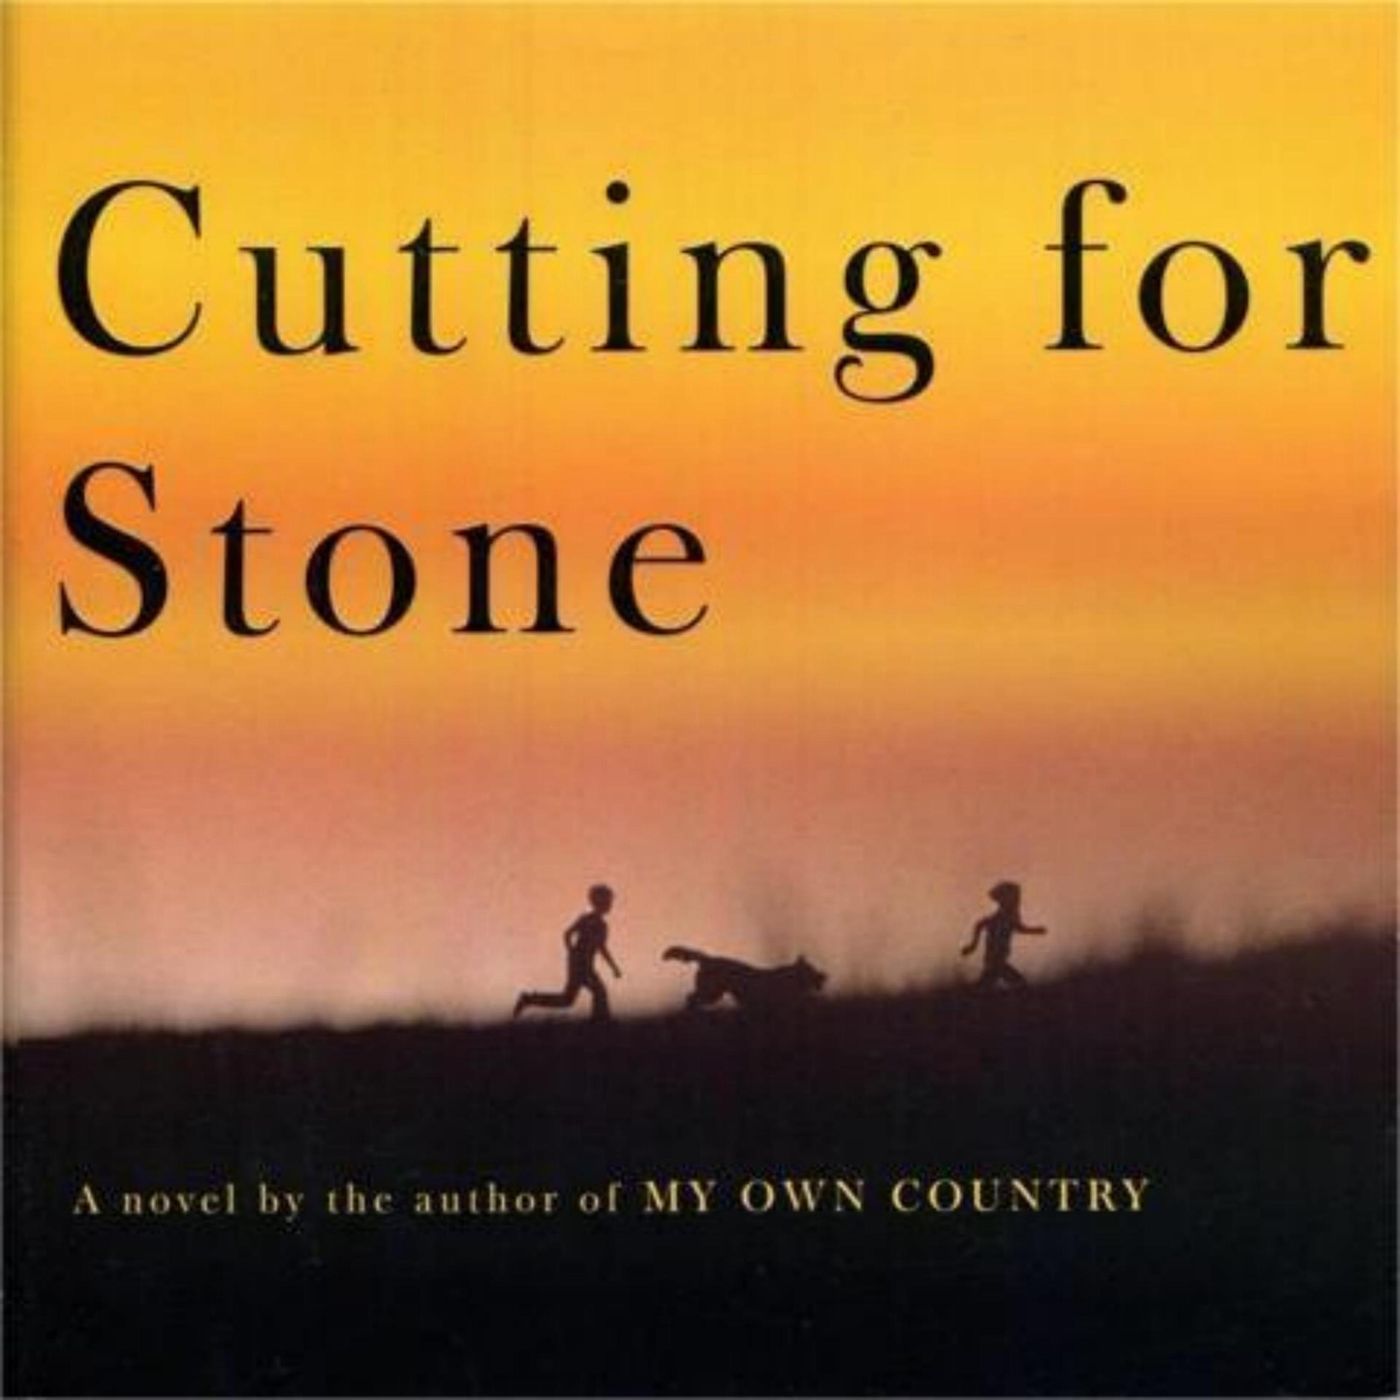 Surgically Precise: Exploring Life and Healing in Cutting For Stone